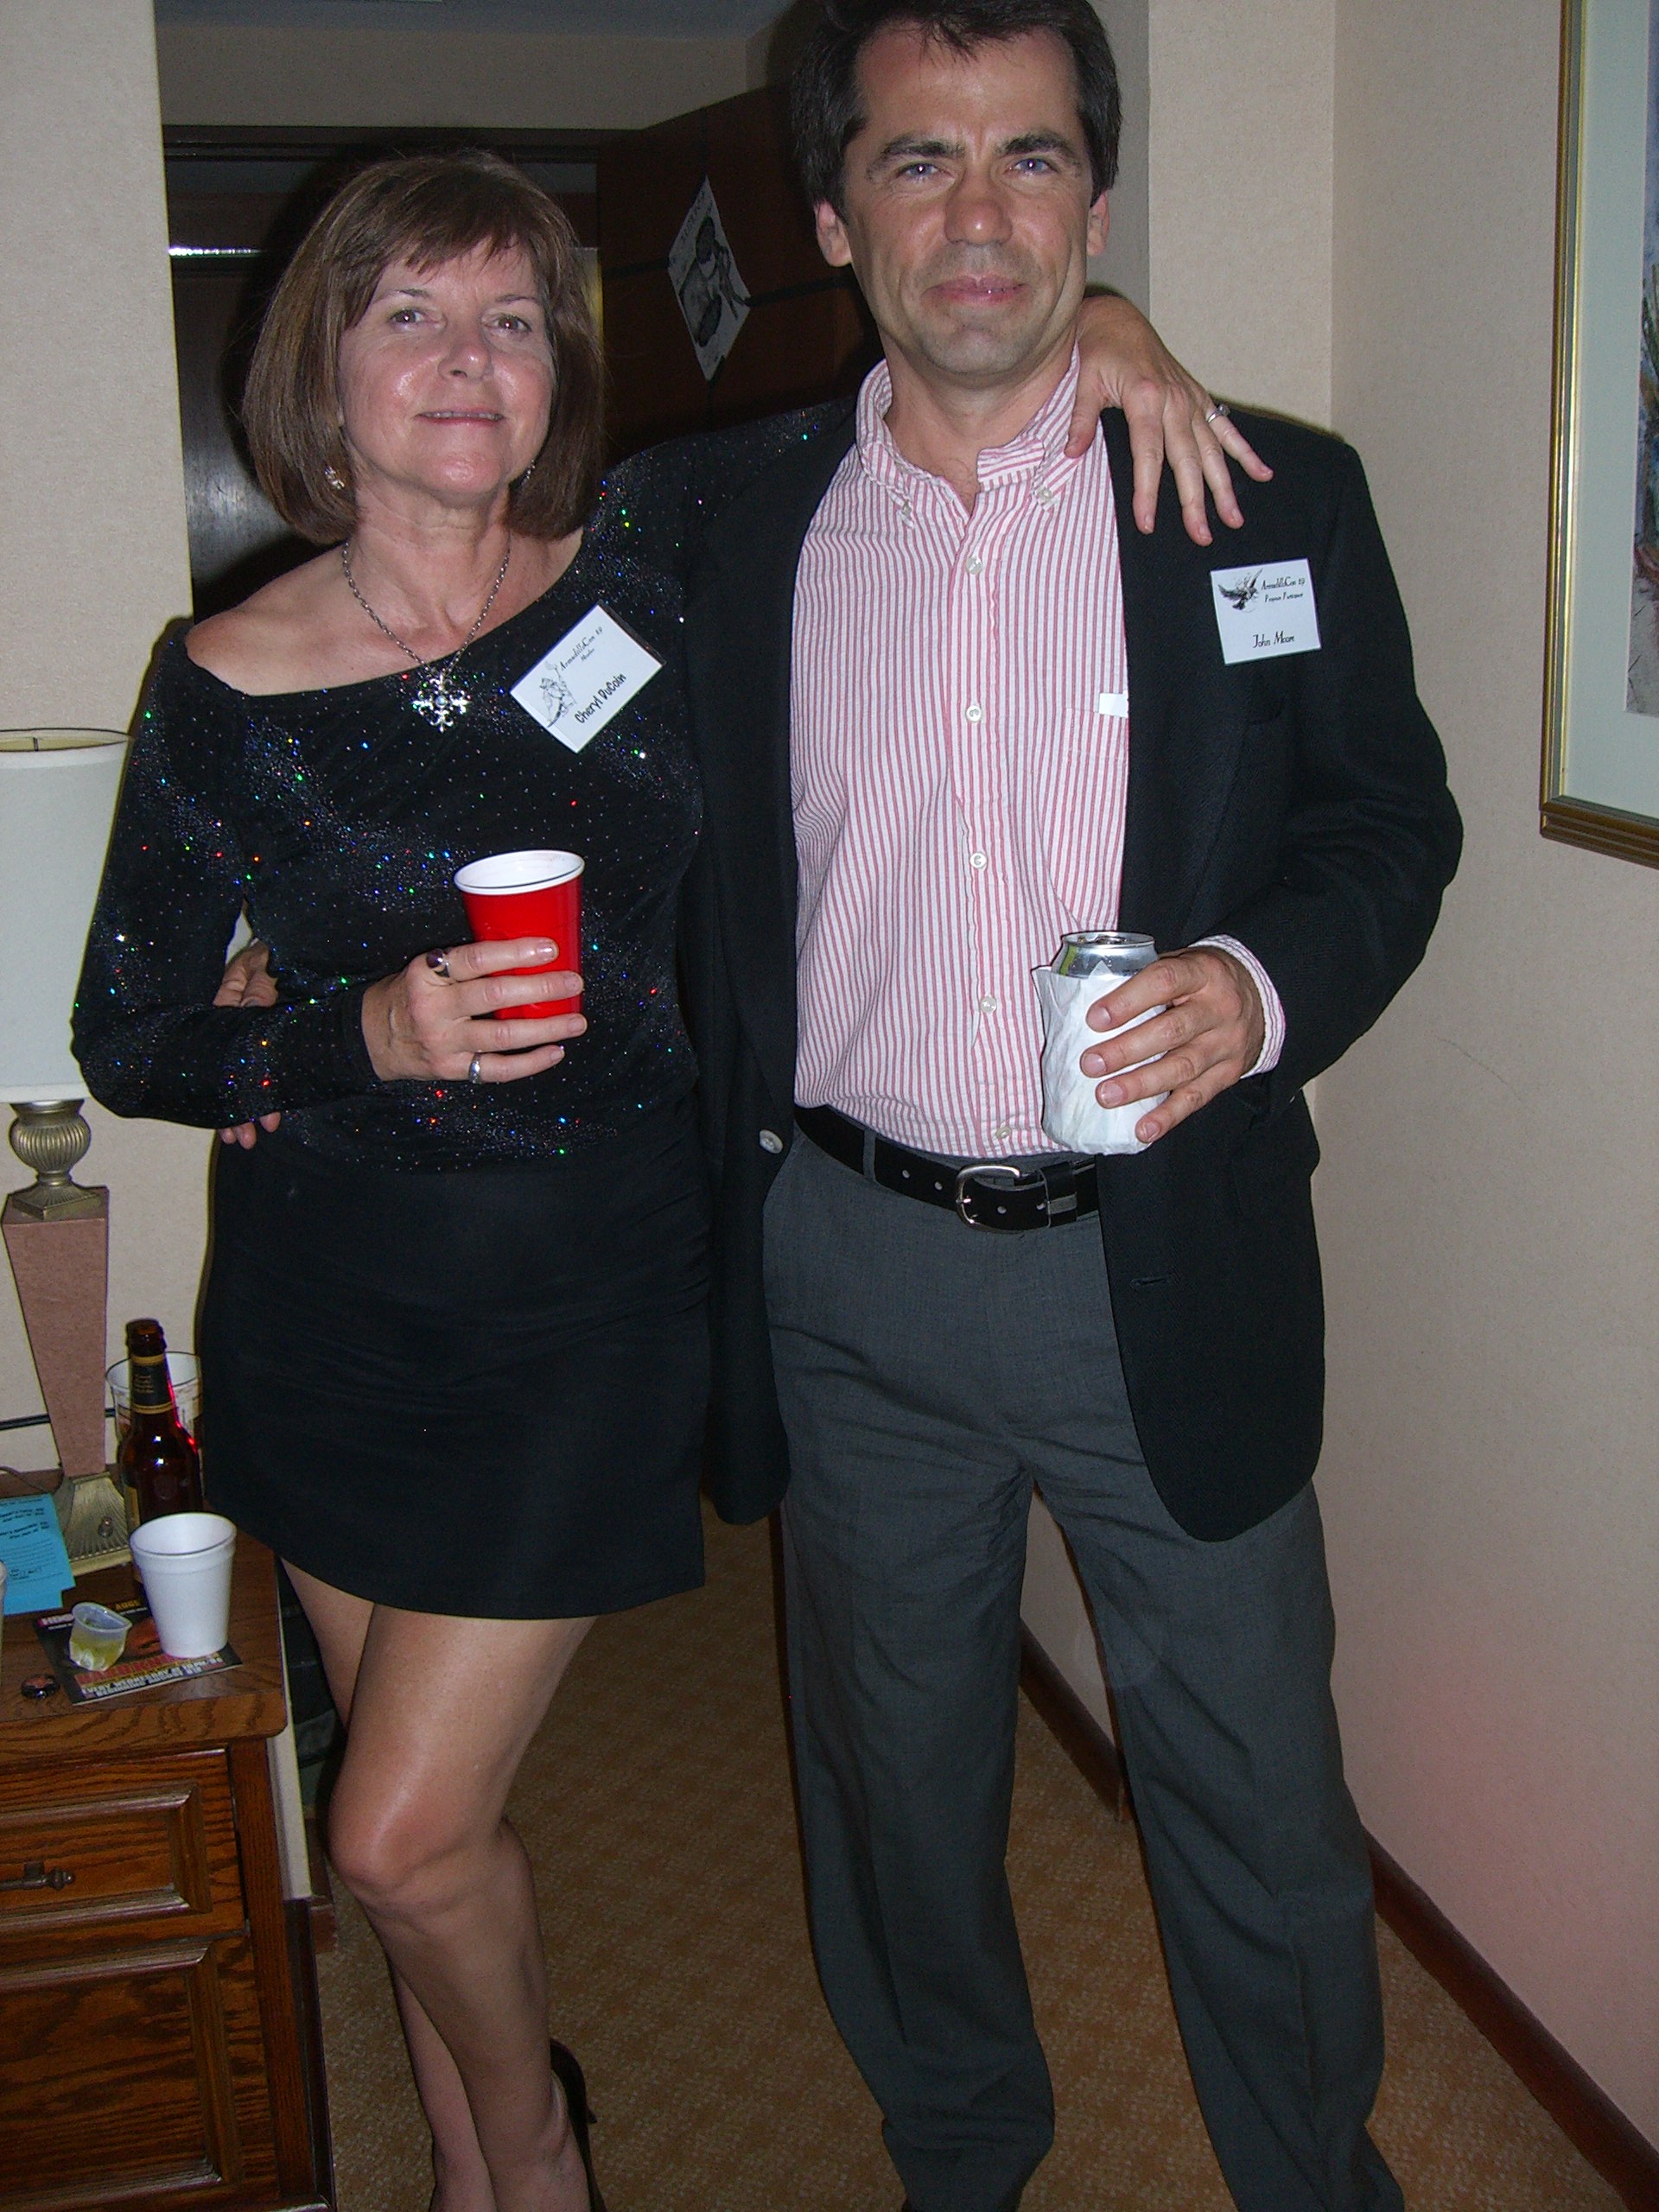 Cheryl DuCoin and John Moore at the RevolutionSF / Space Squid party at the ArmadilloCon 2007